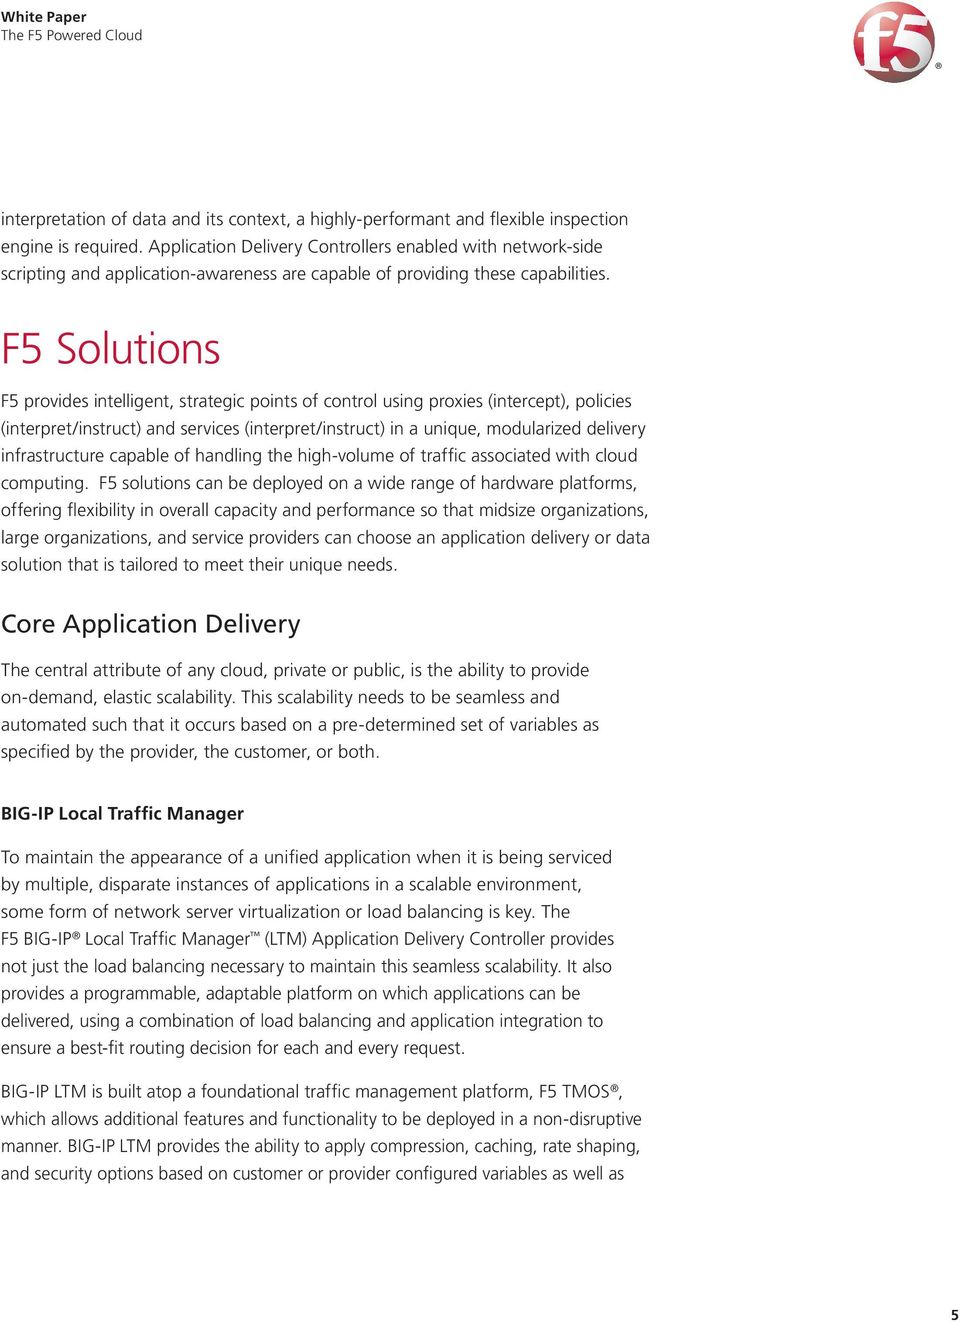 F5 Solutions F5 provides intelligent, strategic points of control using proxies (intercept), policies (interpret/instruct) and services (interpret/instruct) in a unique, modularized delivery